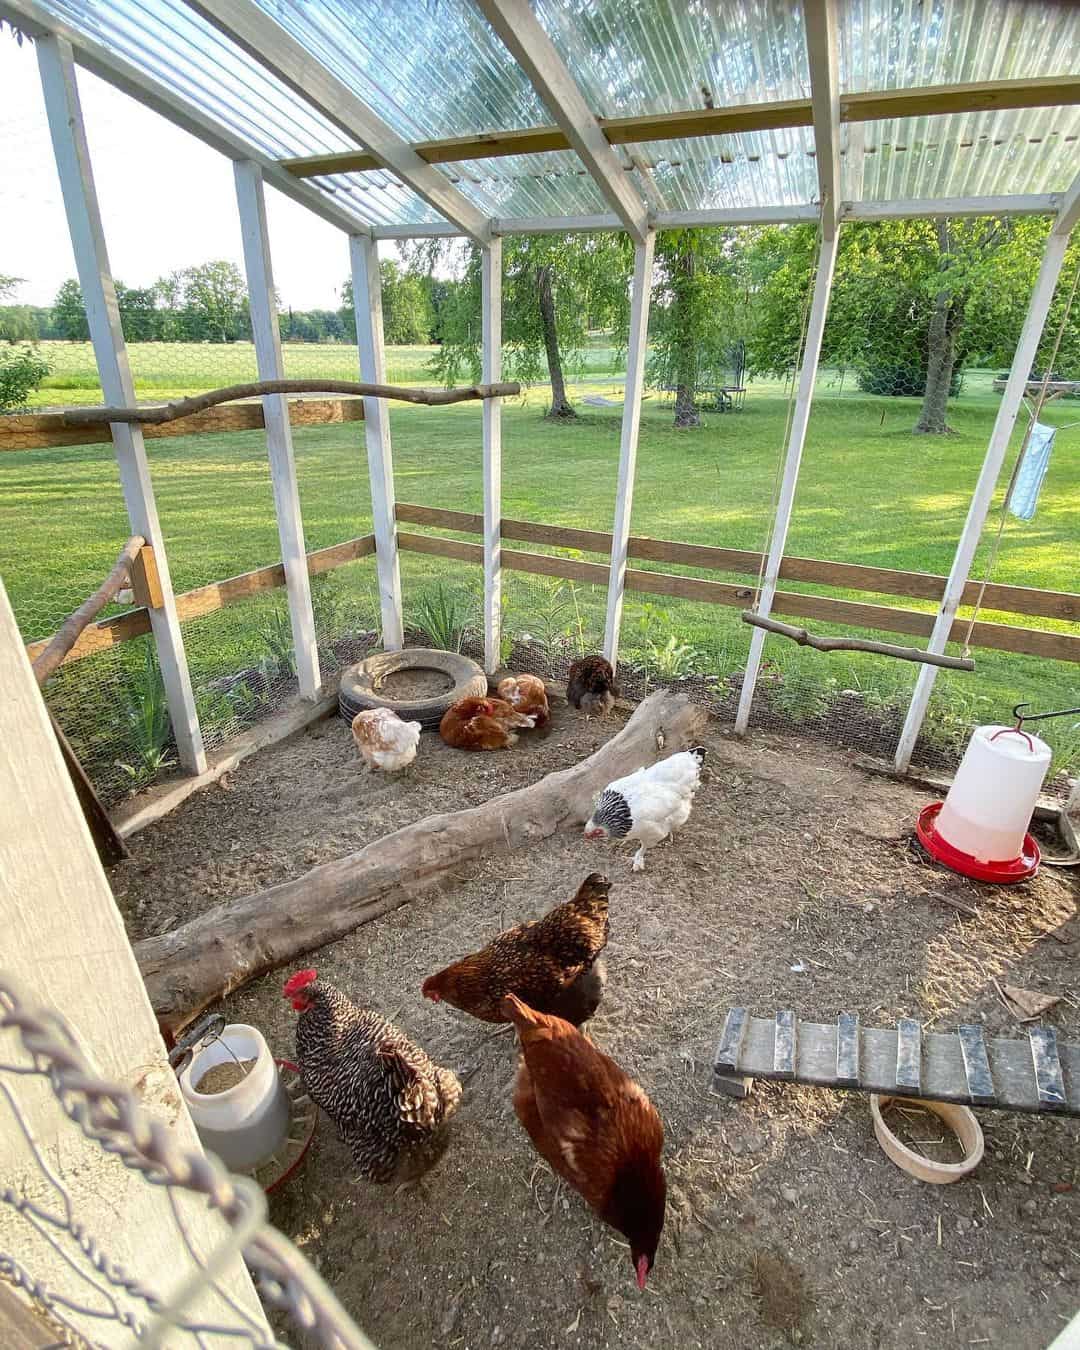 Consider adding multiple baths if you have more chickens